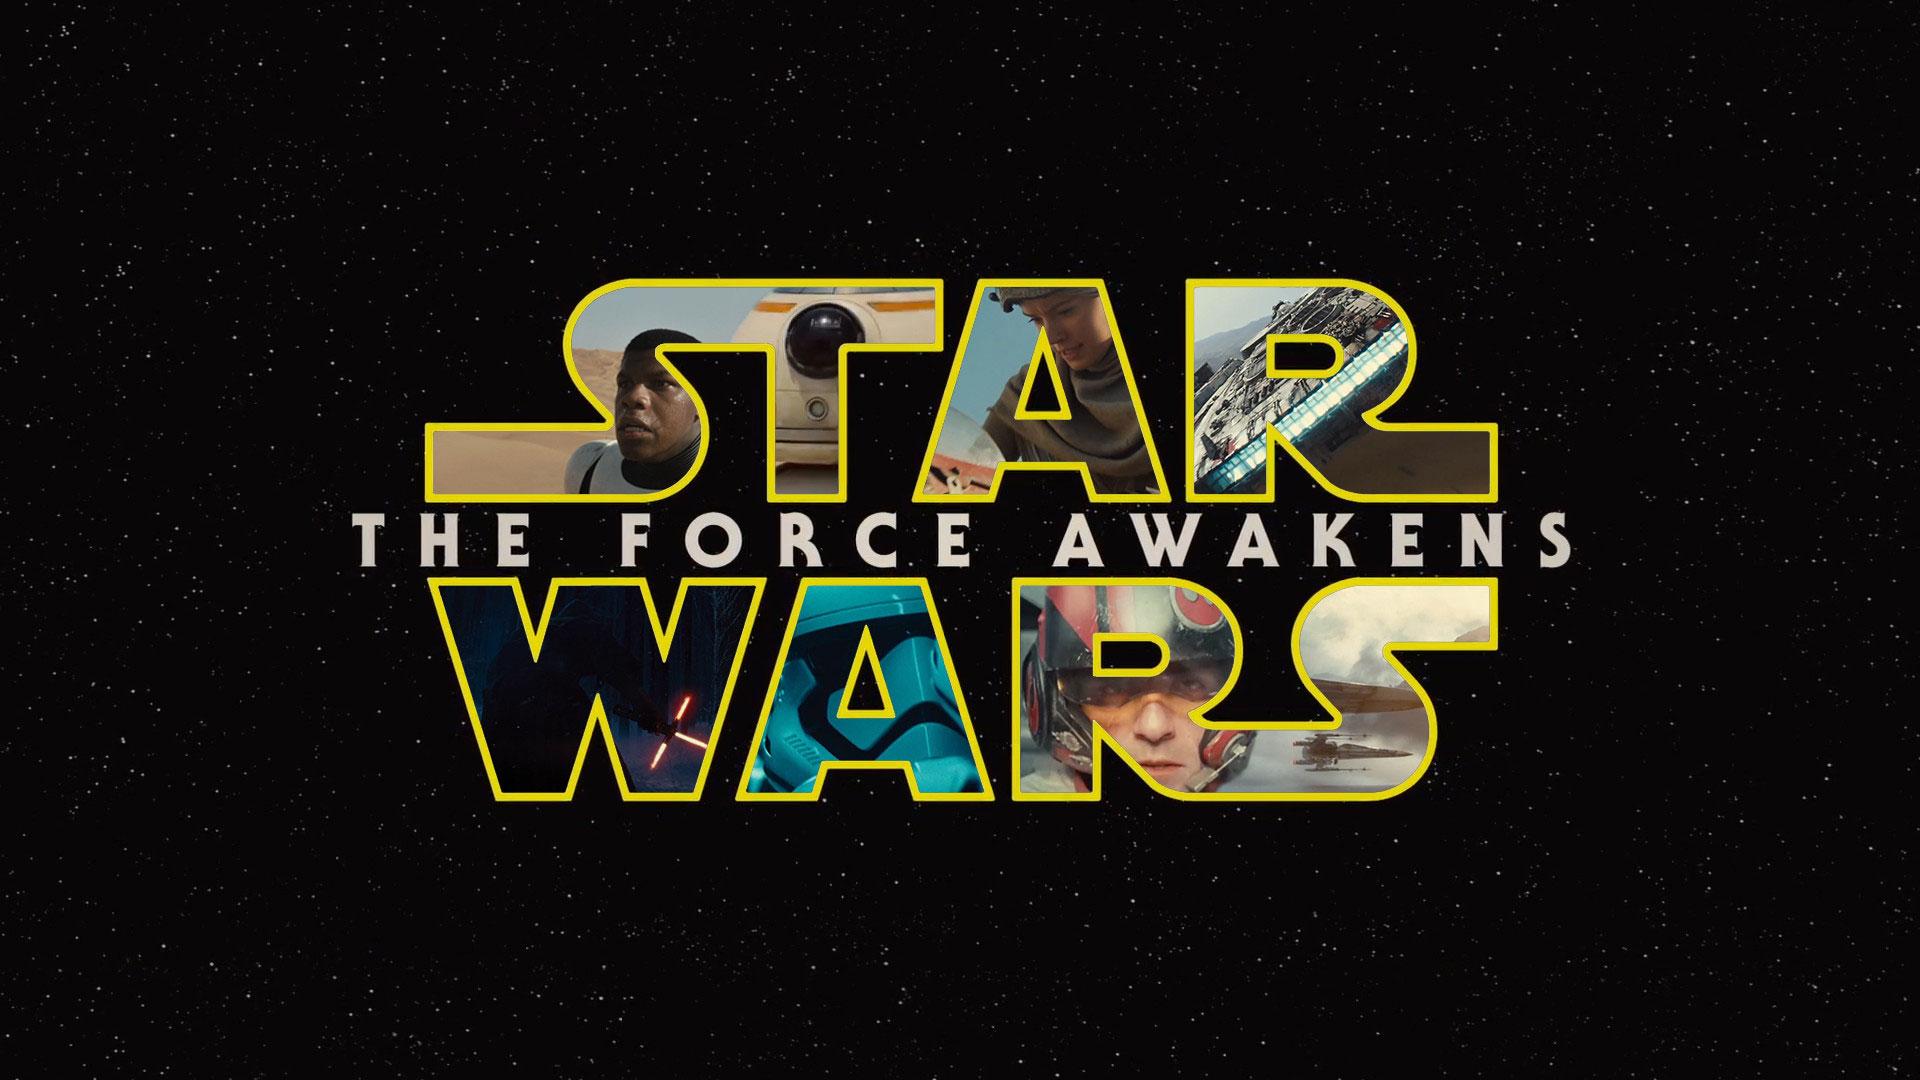 Star Wars: The Force Awakens Wallpapers and Lego Trailer